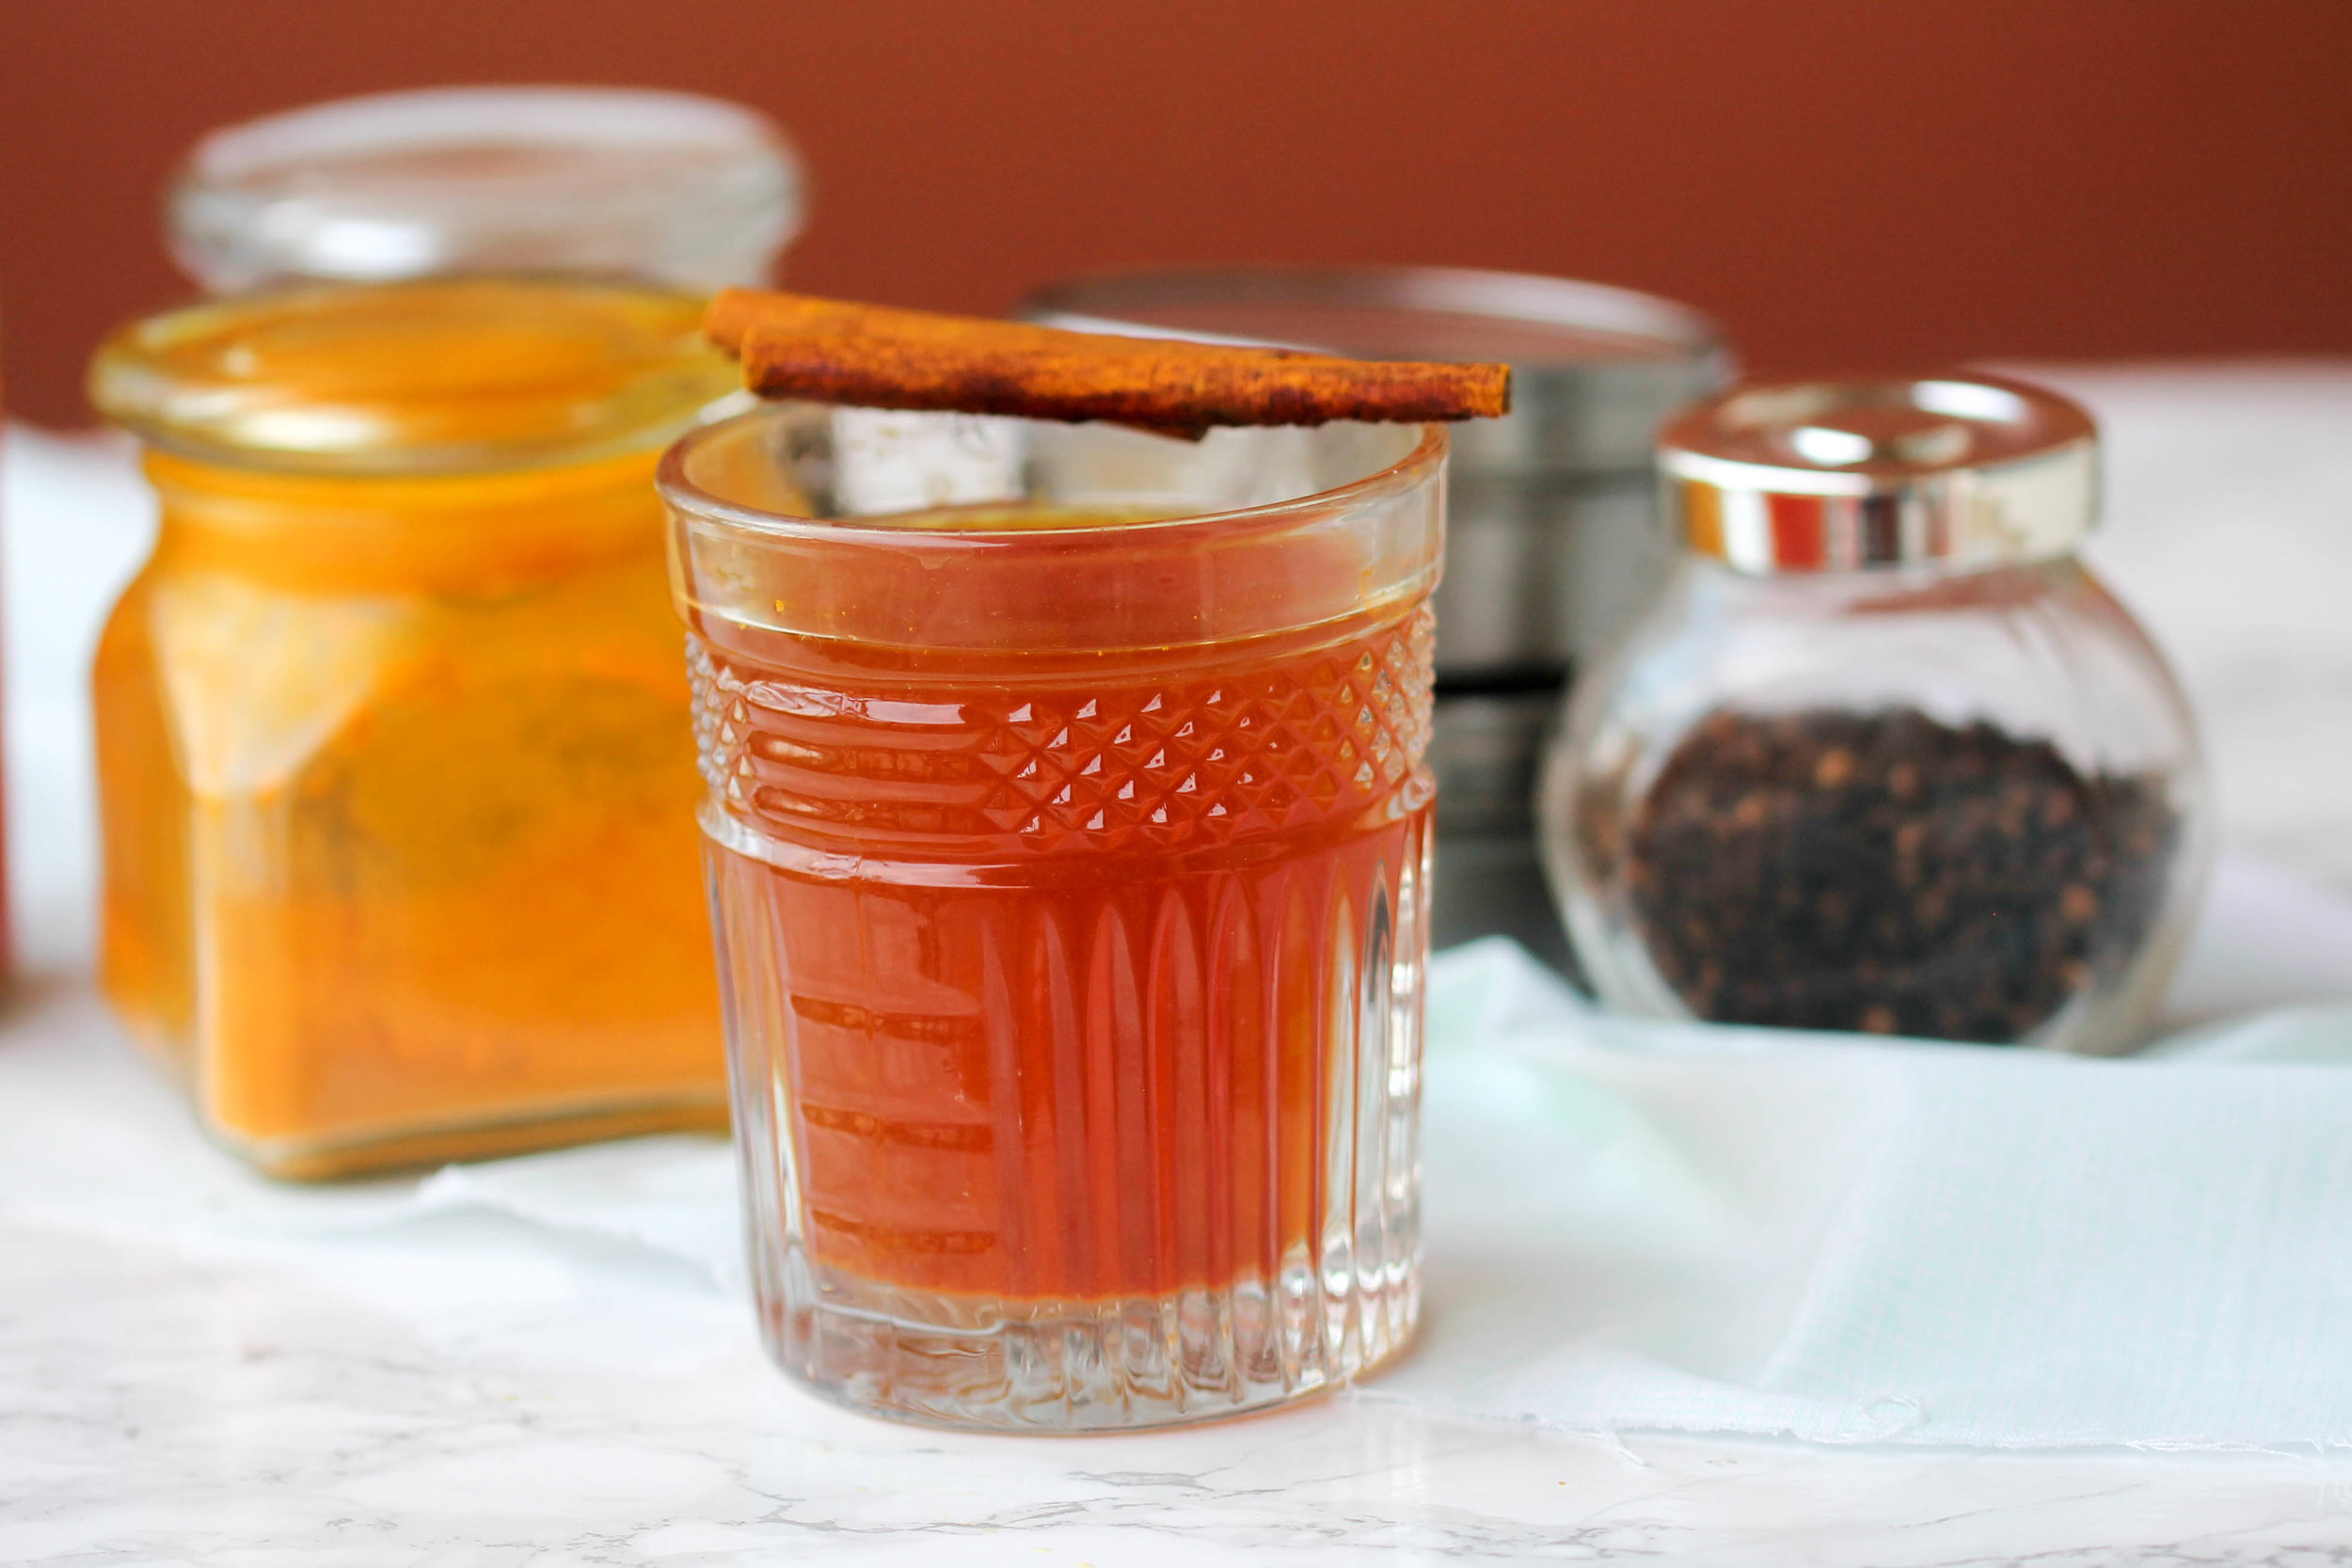 Homemade Cold Tonic with Aromatic Spices!